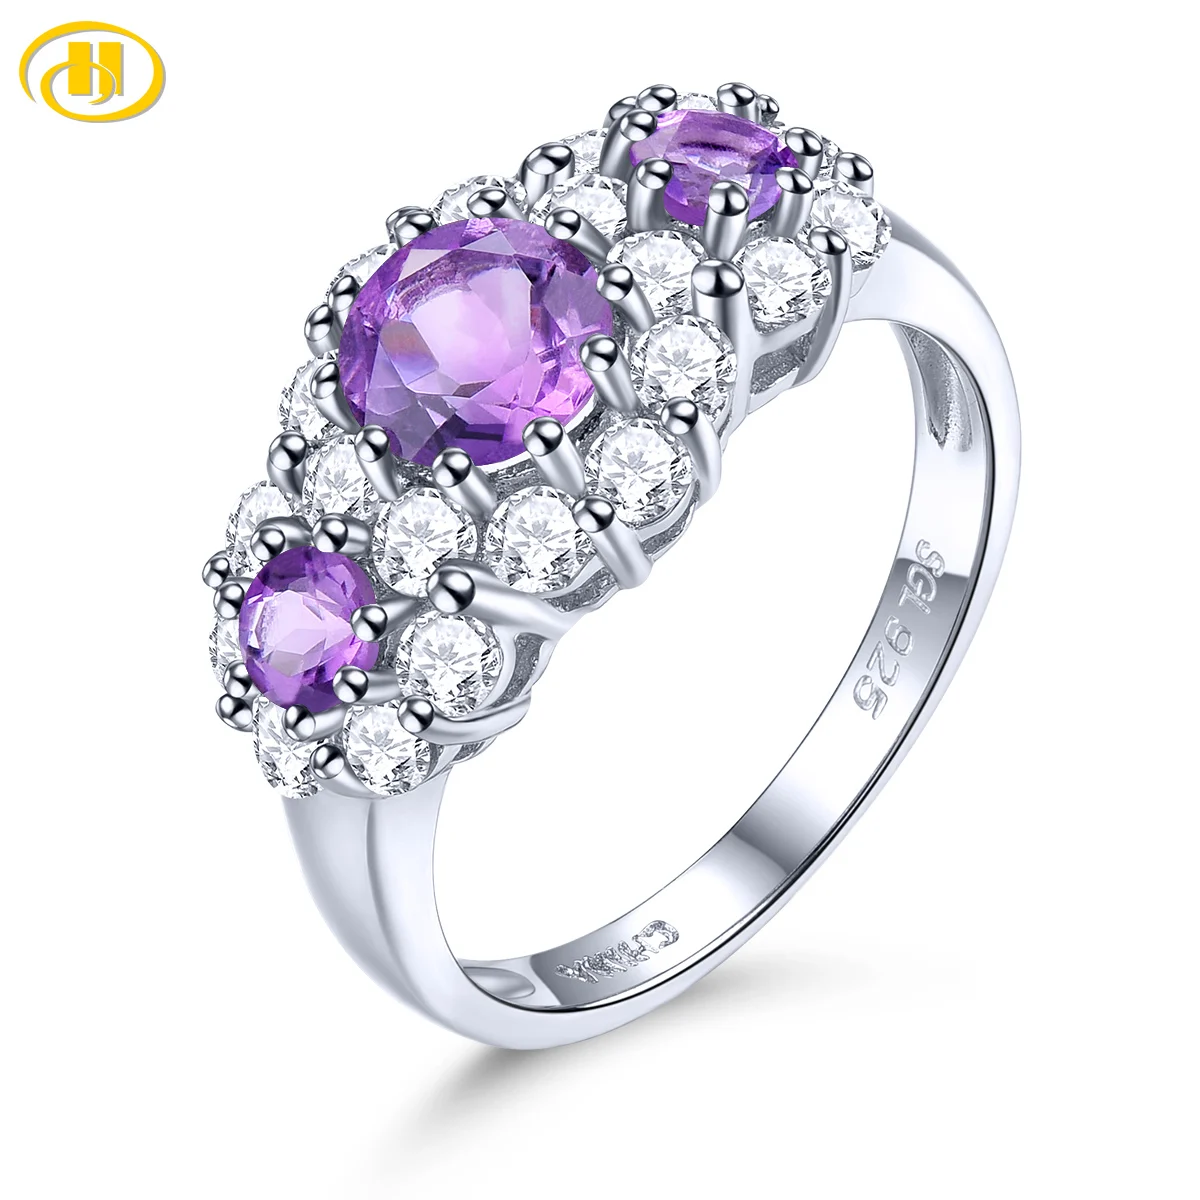 

Stock Clearance Natural Amethyst 925 Silver Ring 1.03 Carats Genuine Gemstone Engagement Gift Romantic Style Fine Jewelry